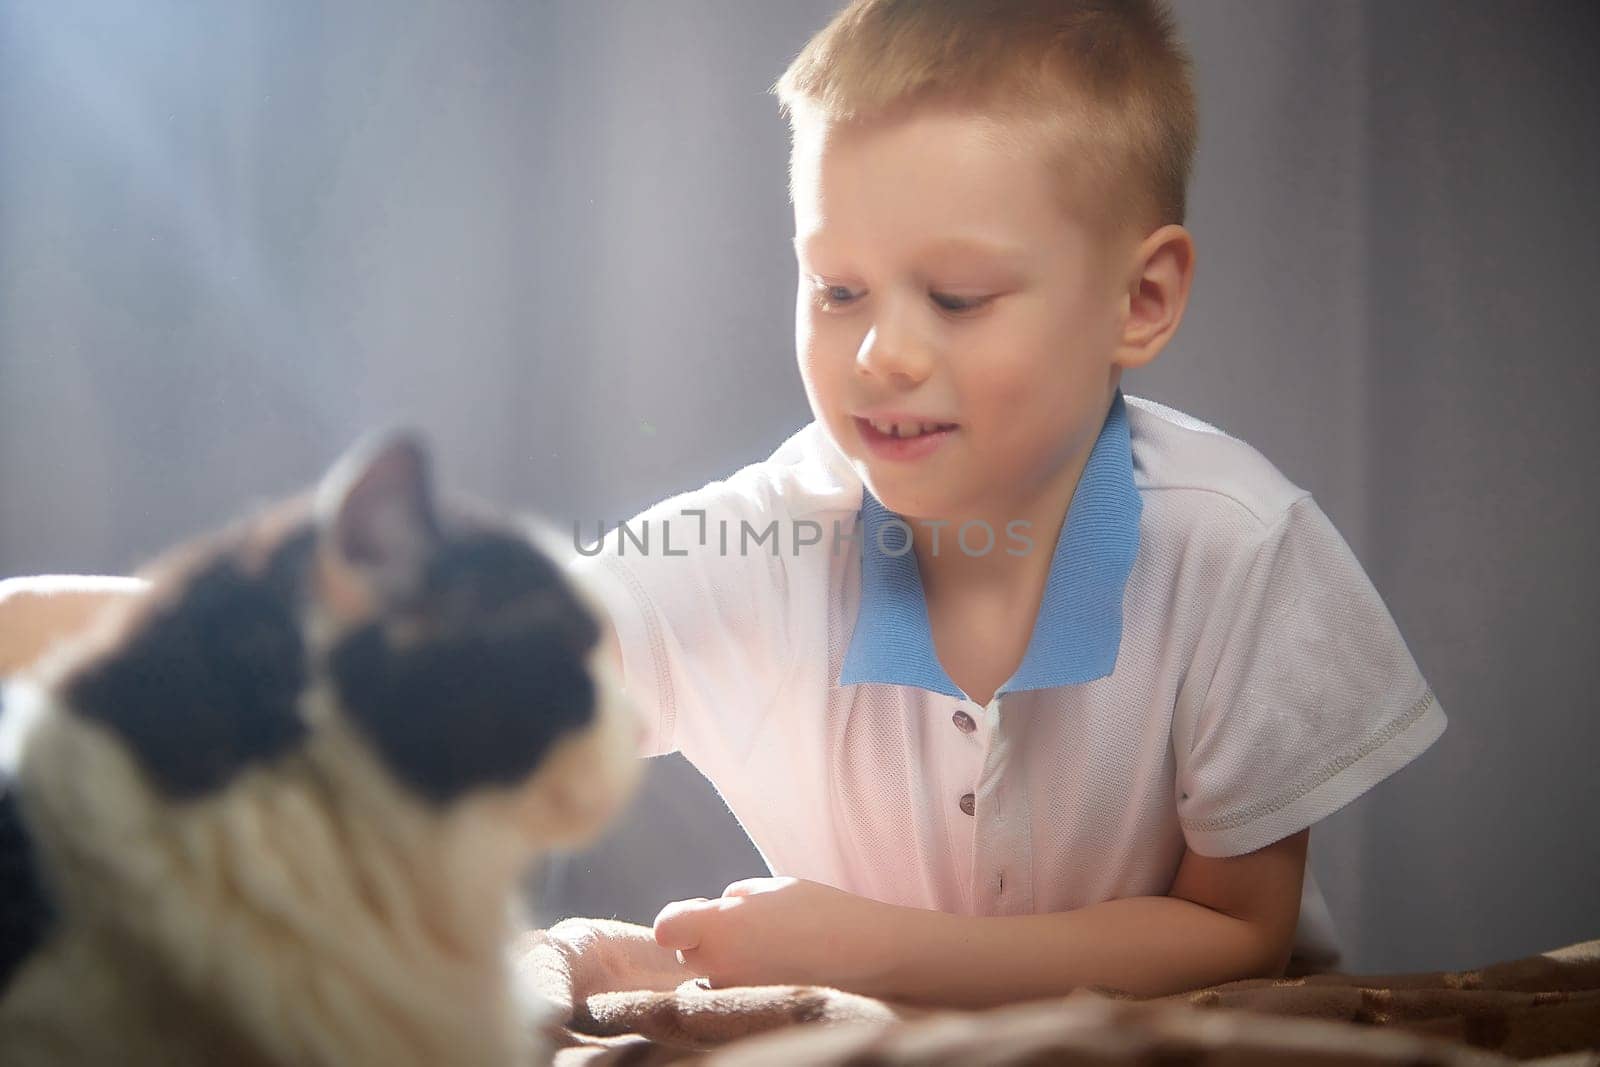 Cute little boy playing with white and black cat in photo studio with white fabric background. Concept of friendship of child and pet